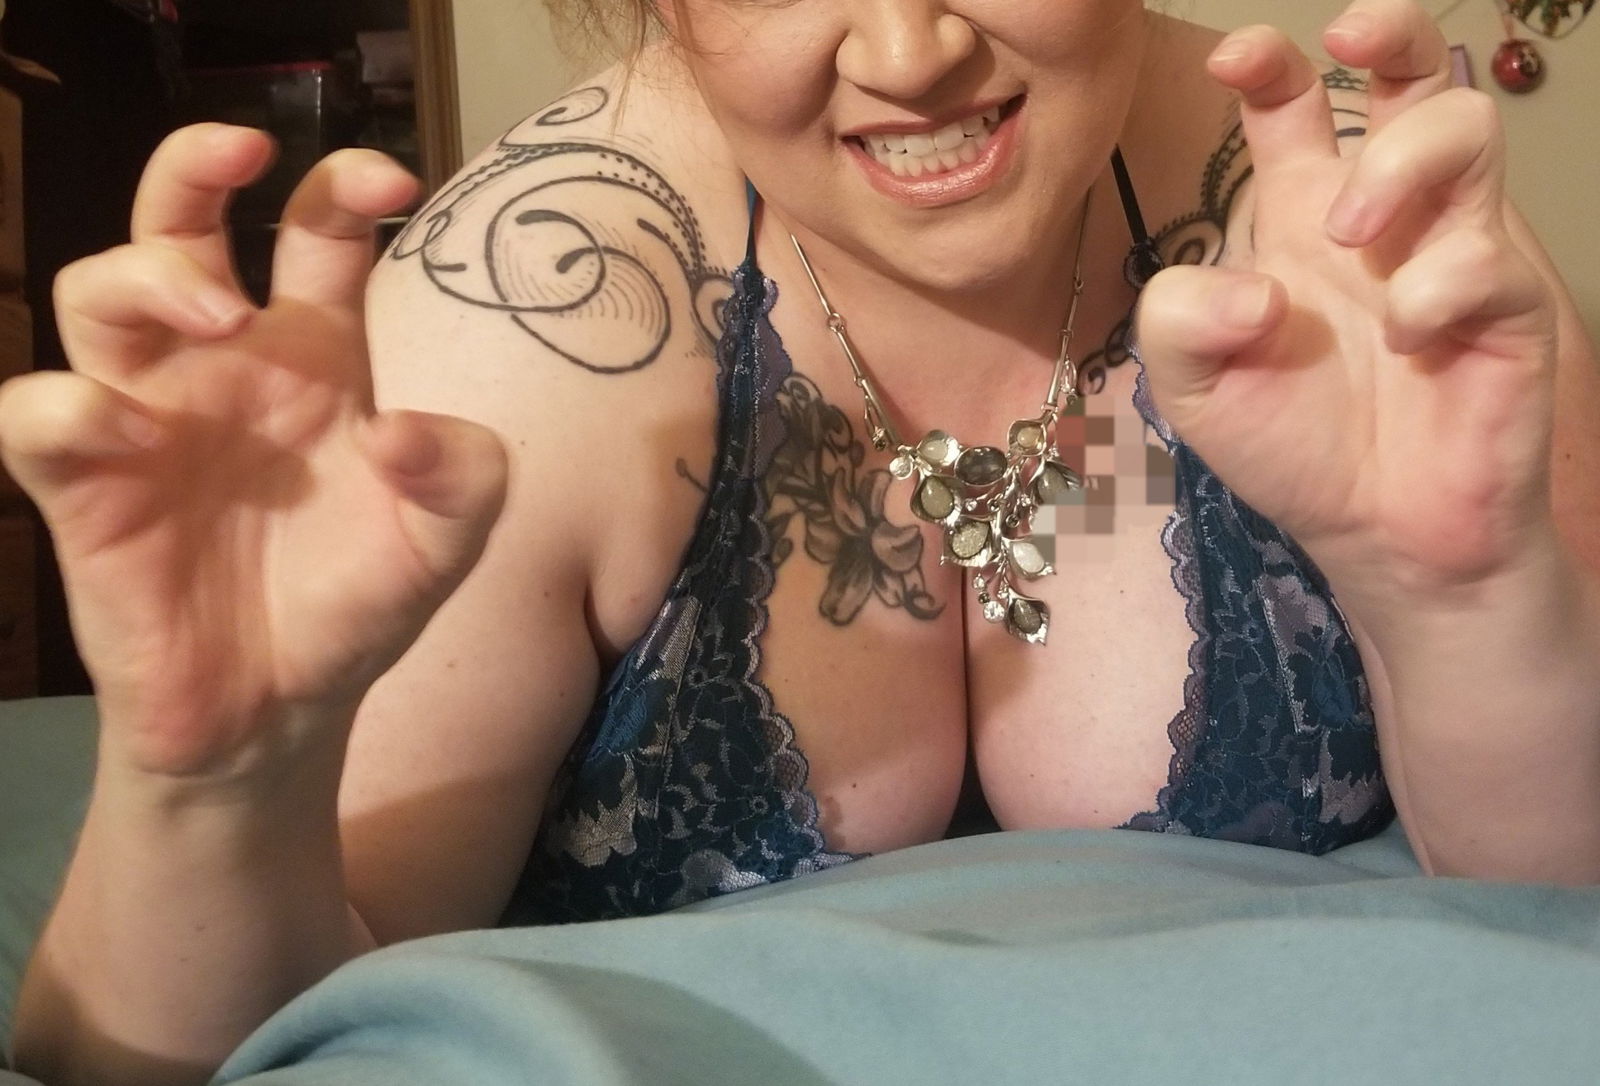 Watch the Photo by MyThickWife2022 with the username @MyThickWife2022, who is a verified user, posted on February 25, 2023. The post is about the topic Sexy BBW and Chubby.